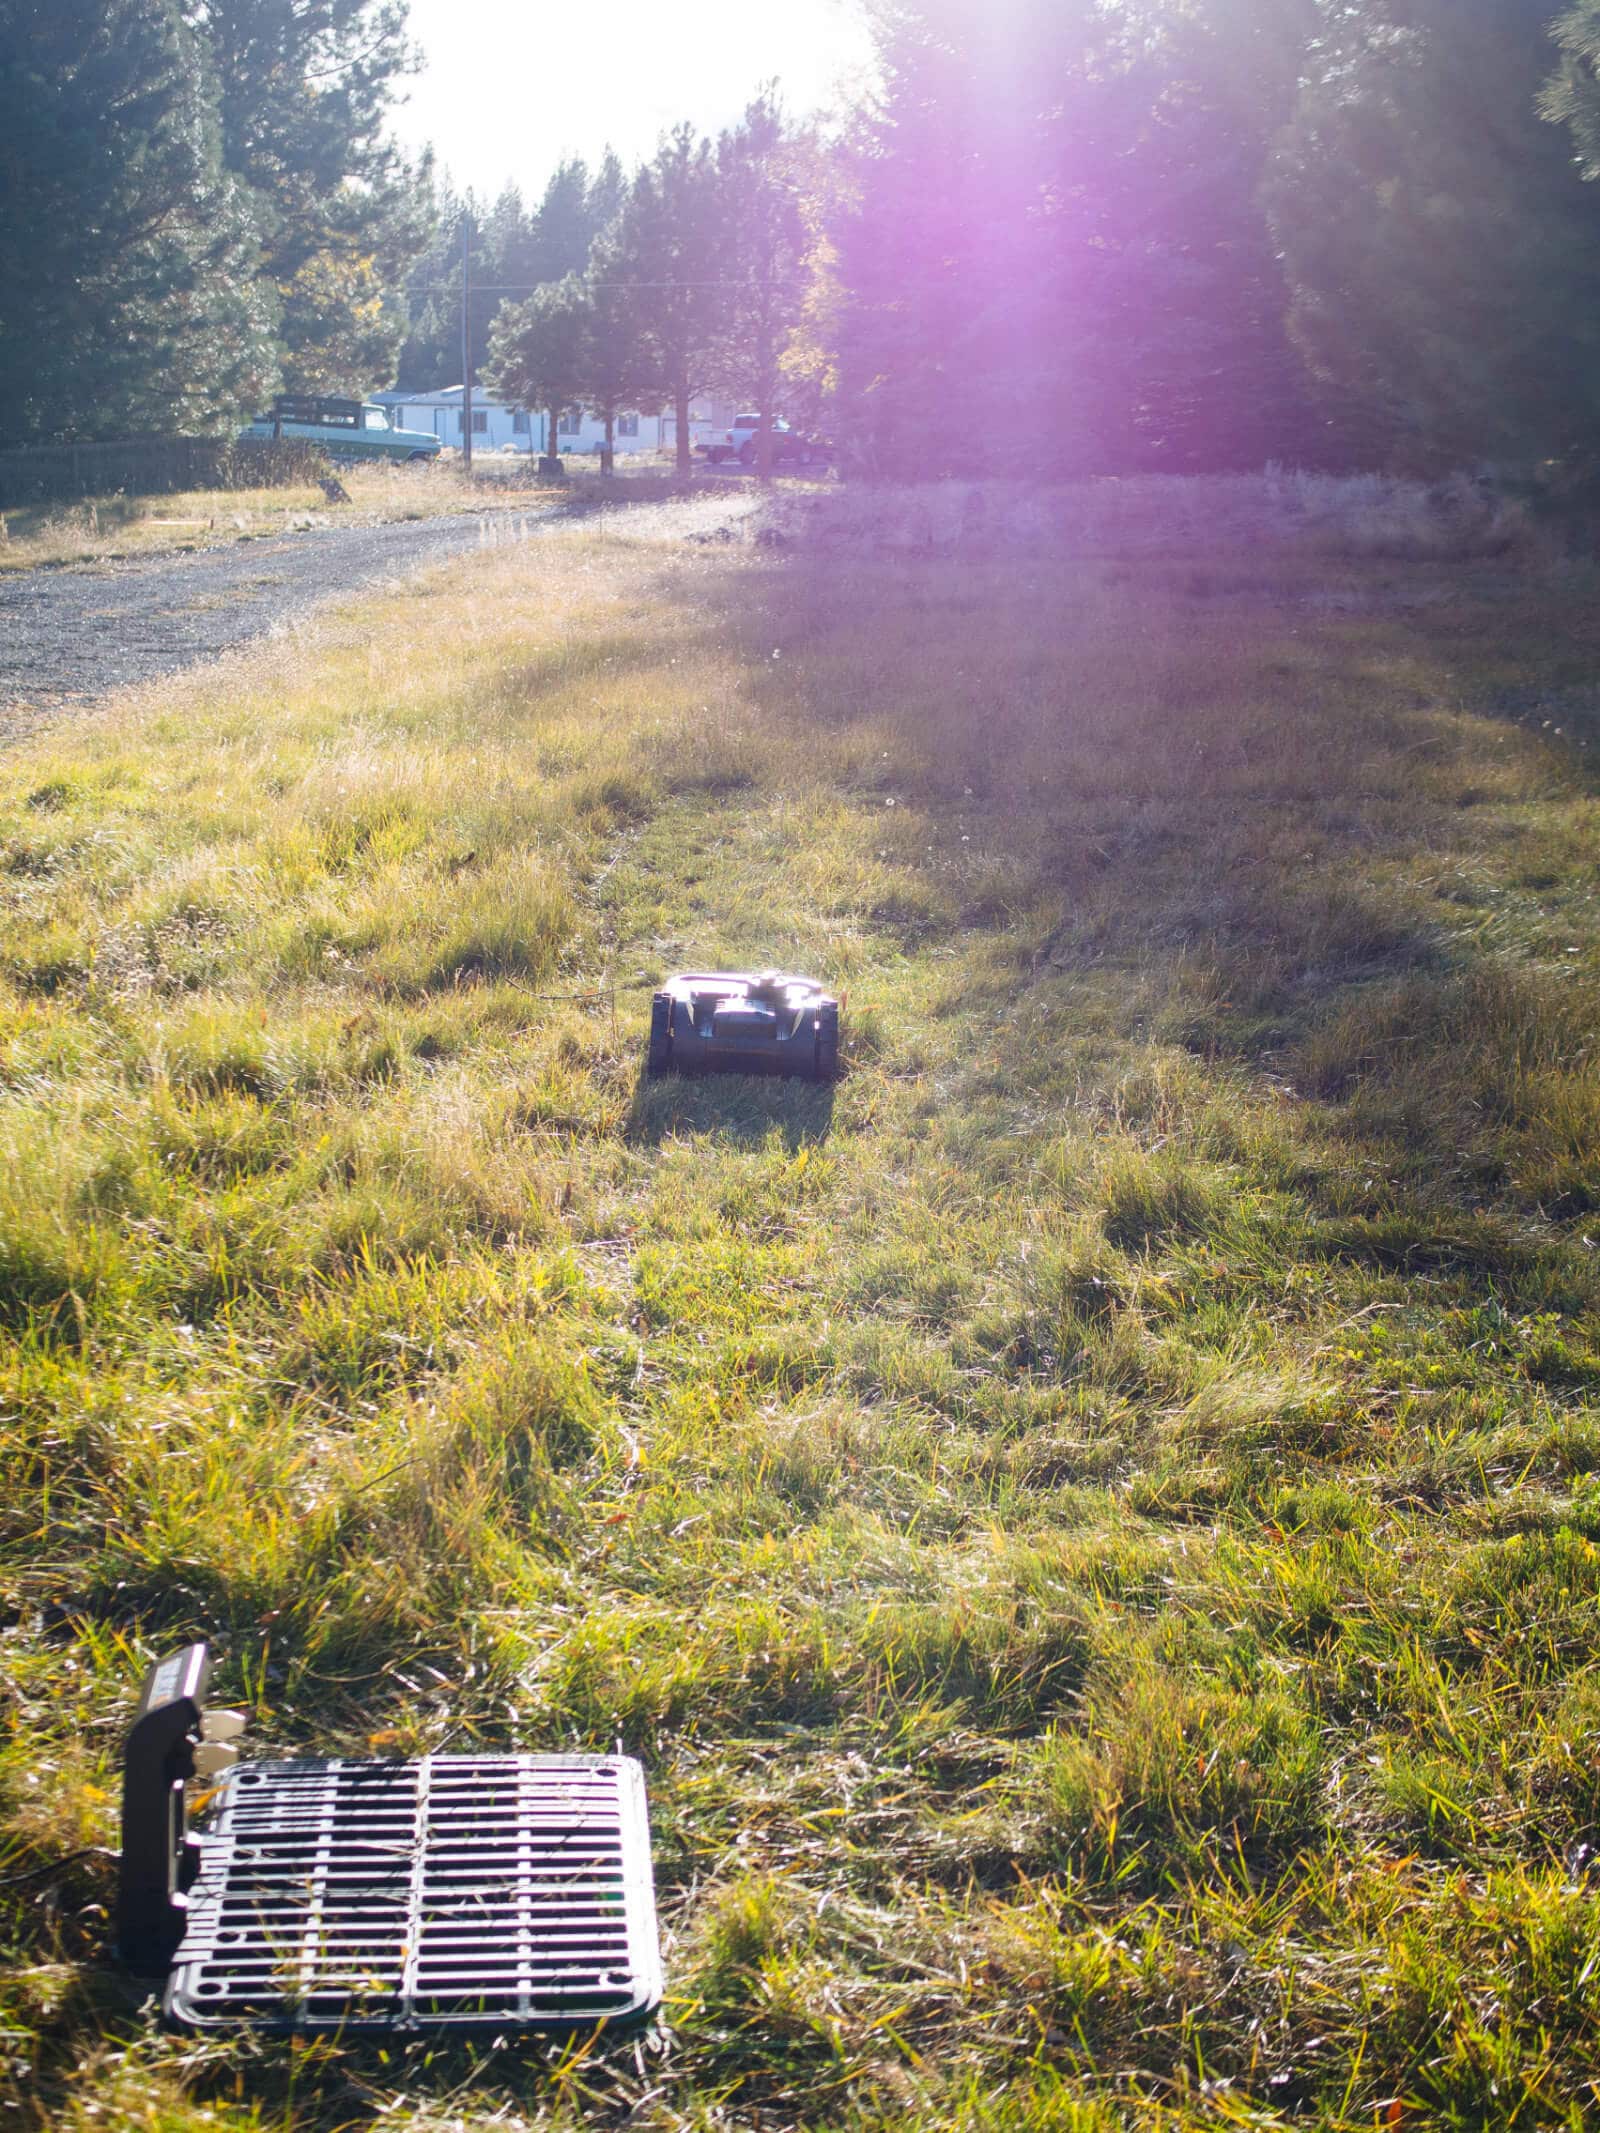 Landroid robotic lawnmower cutting the grass